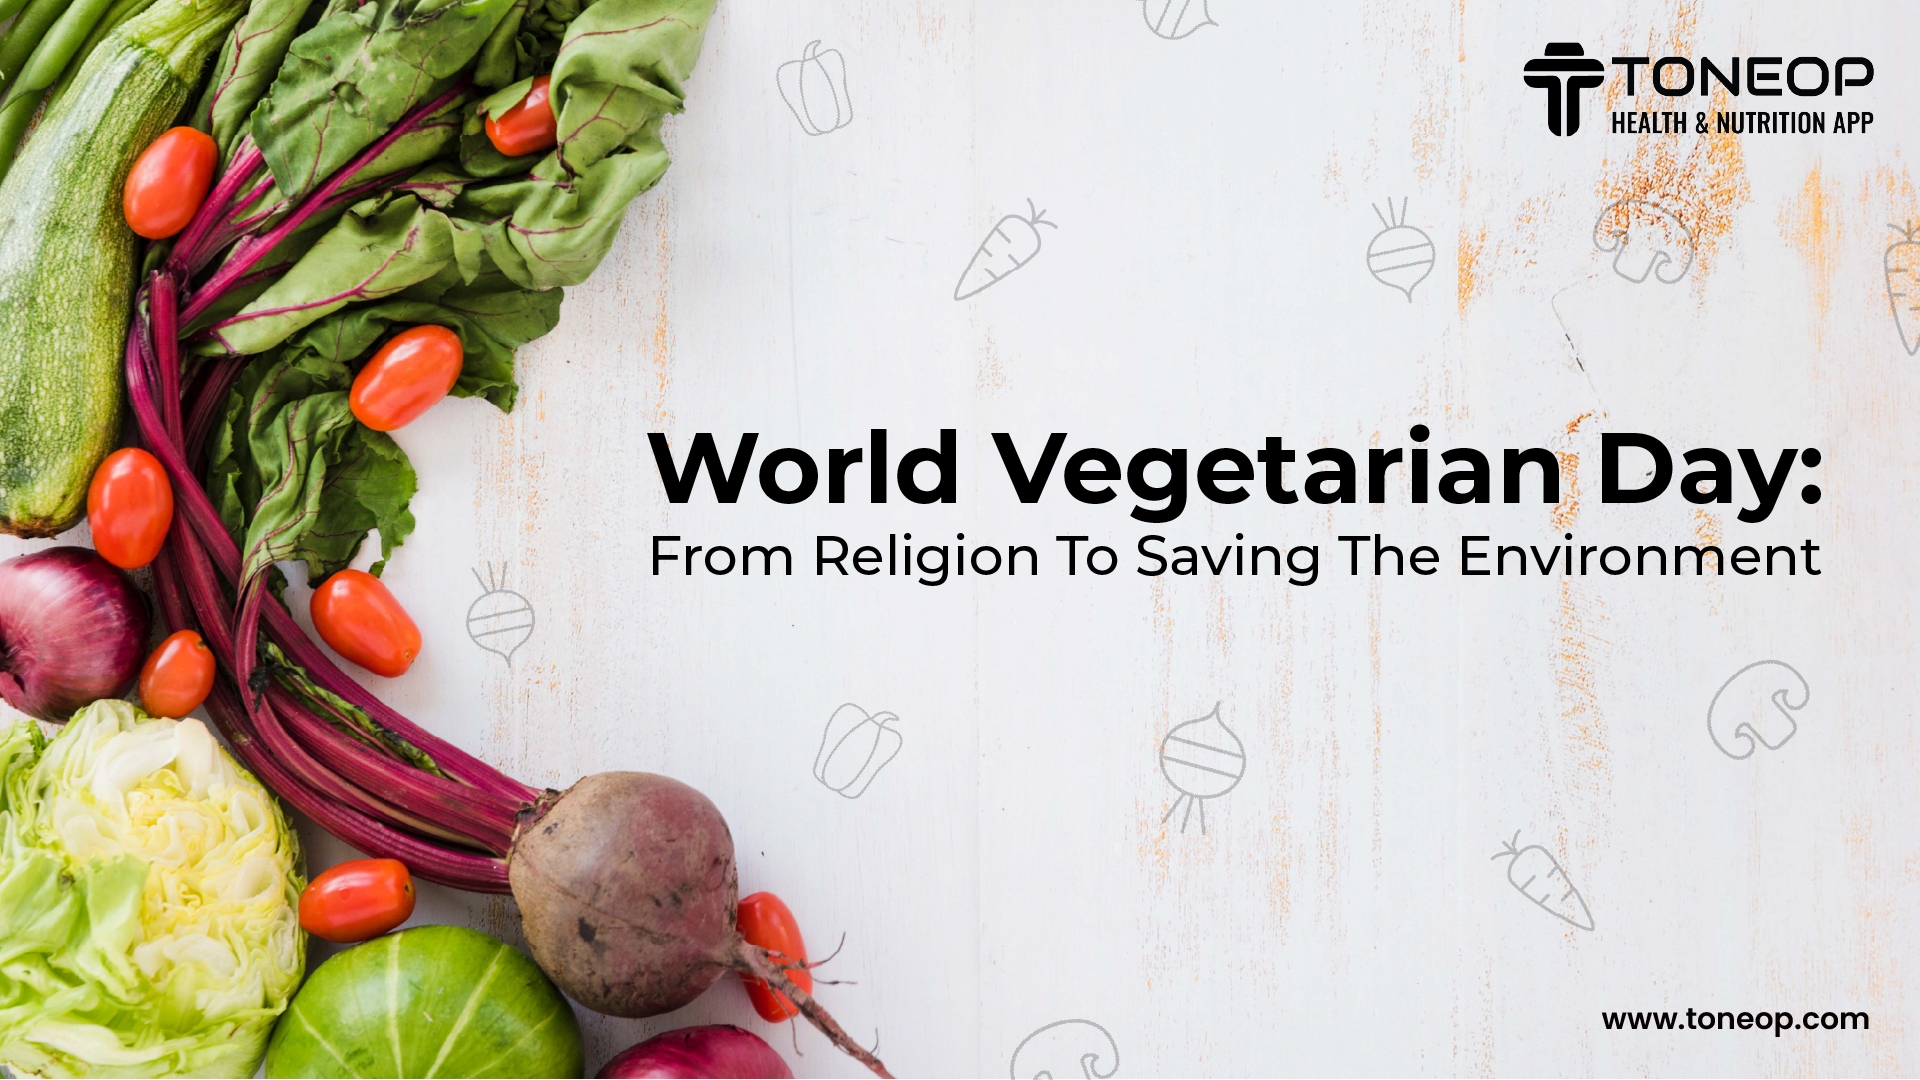 World Vegetarian Day: From Religion To Saving The Environment